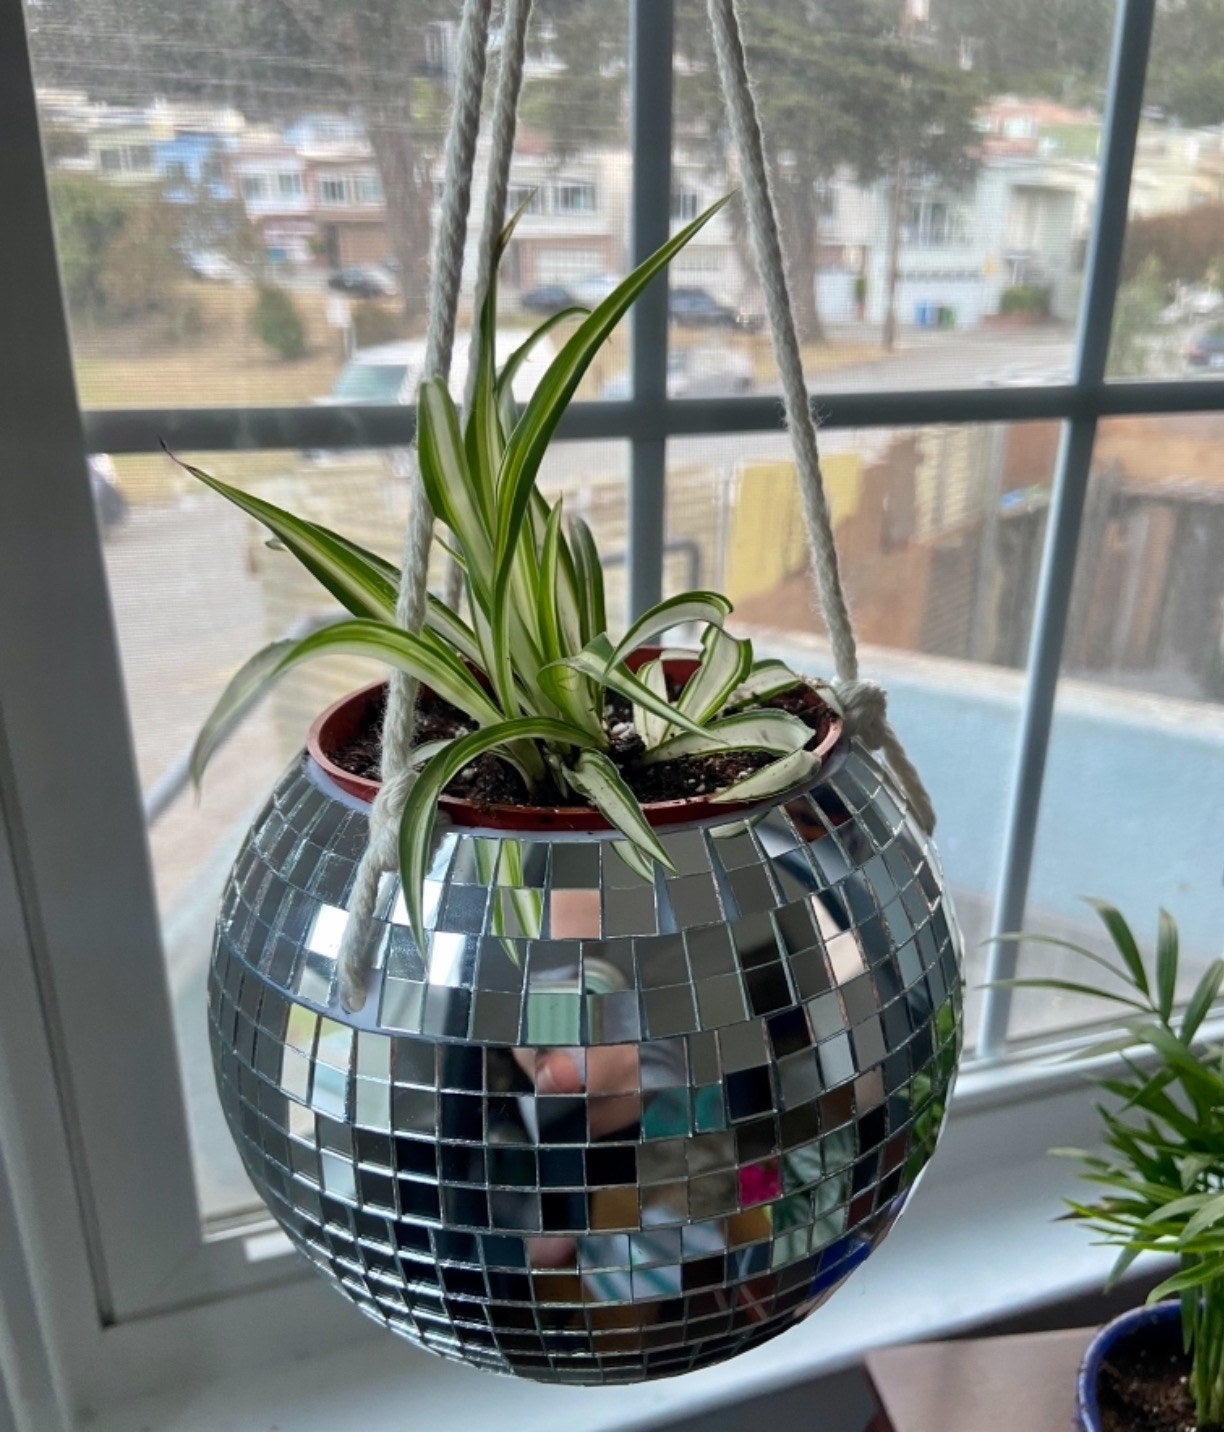 a reviewer's image of the disco ball with a plant inside